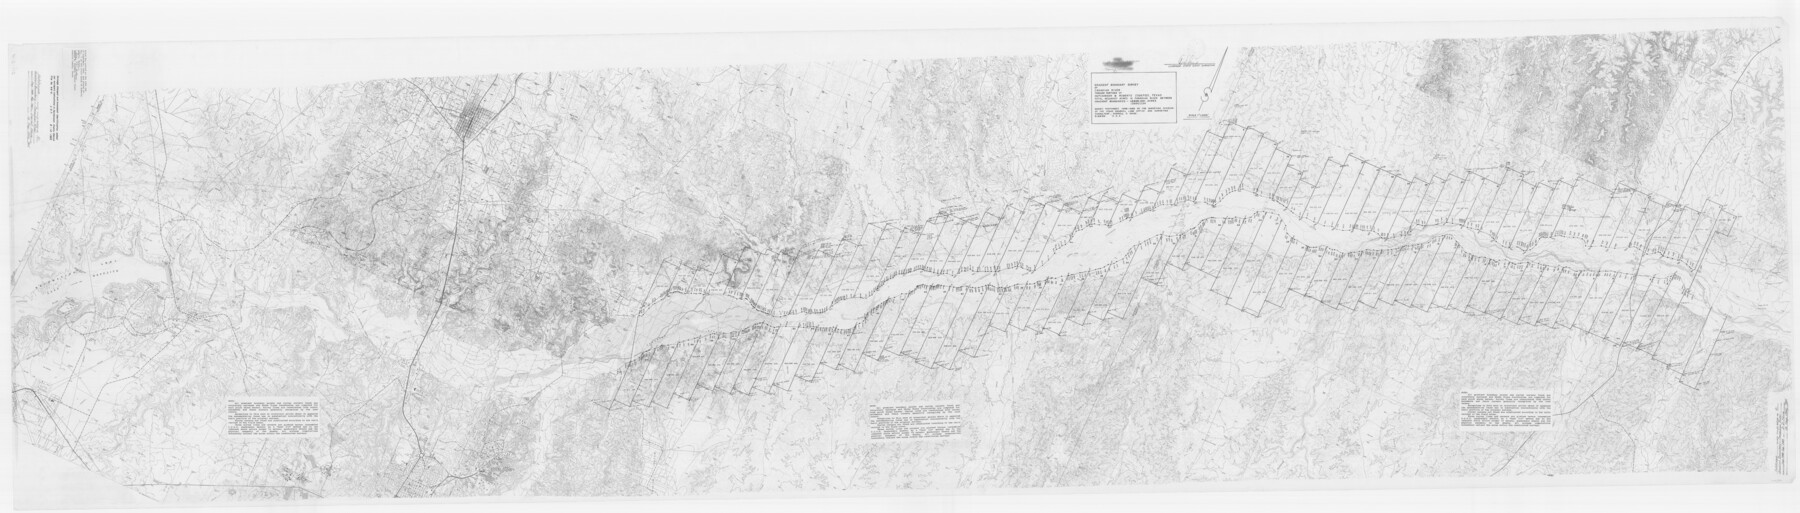 3120, Gradient Boundary Survey of Canadian River through portions of Hutchinson & Roberts Counties, Texas, General Map Collection